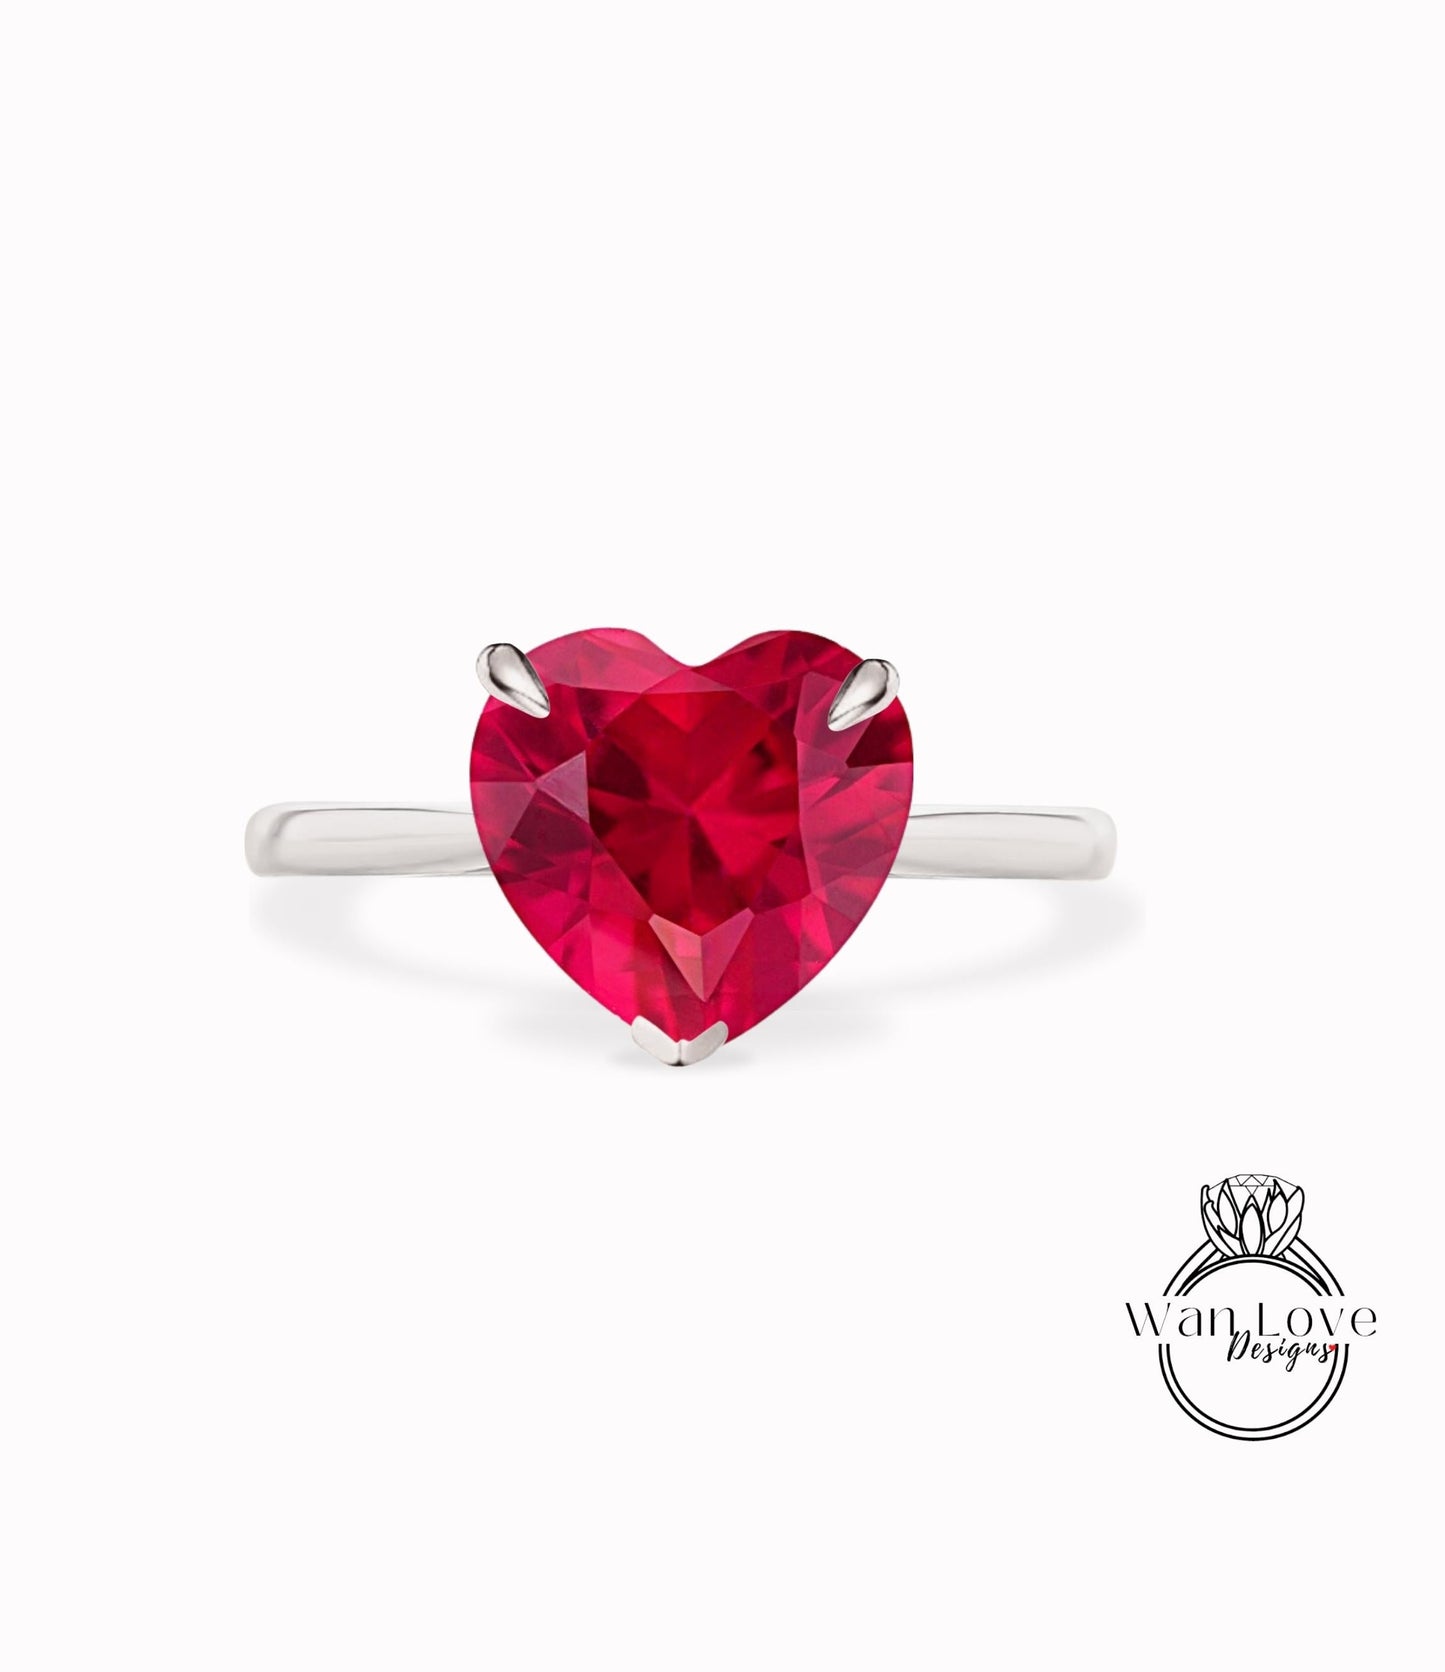 Heart cut Ruby Engagement ring vintage white gold solitaire engagement ring woman unique alternative ring Bridal Anniversary gift Wan Love Designs